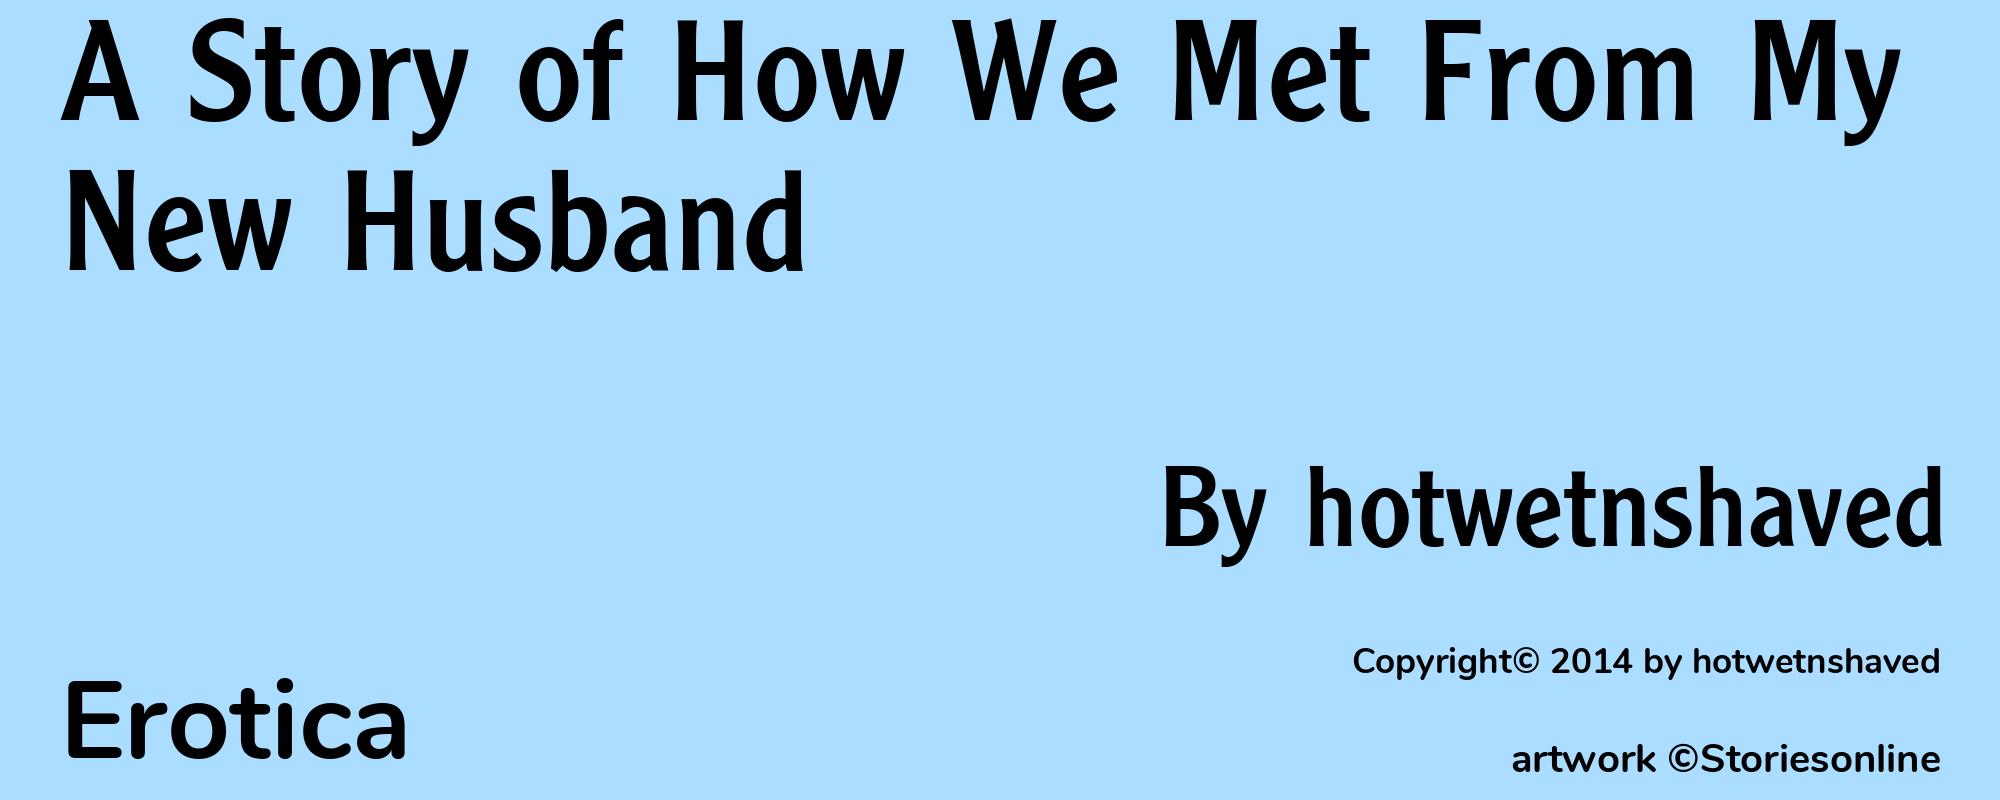 A Story of How We Met From My New Husband - Cover